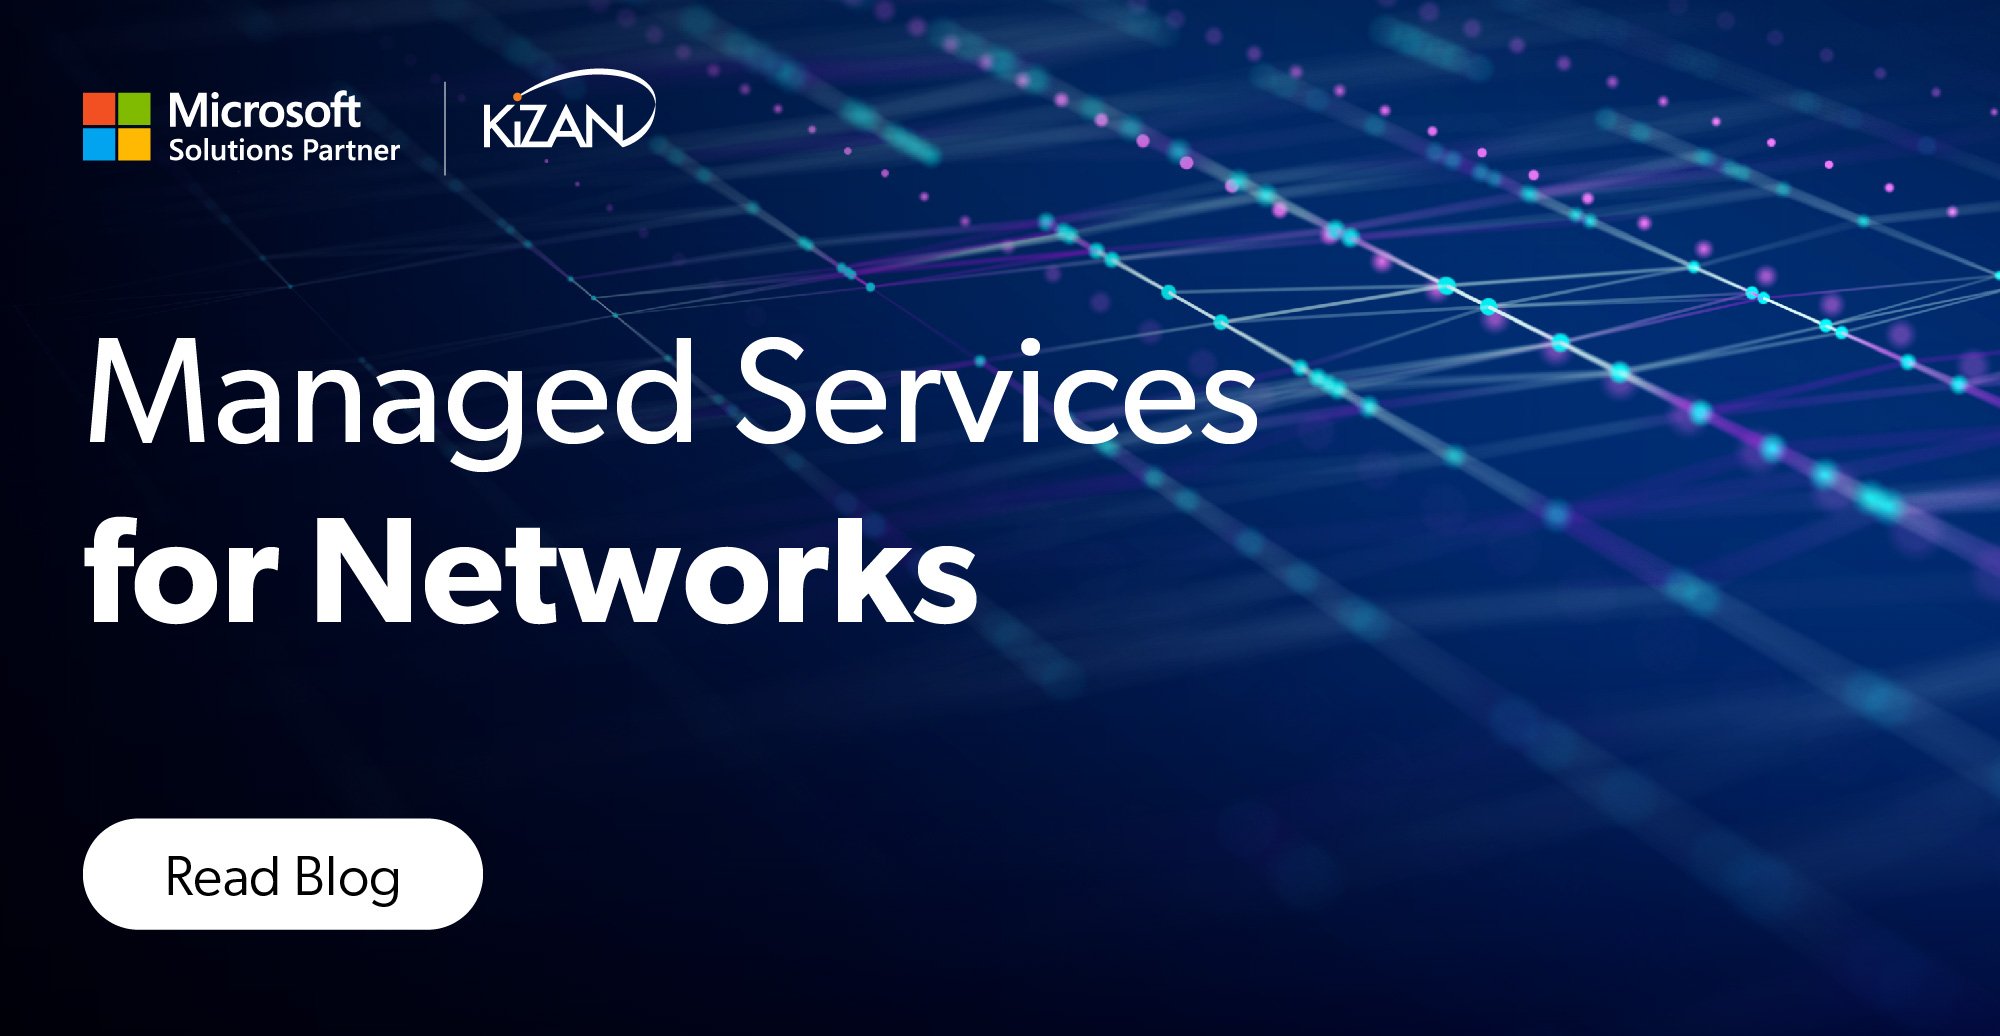 KiZAN | Managed Services for Networks